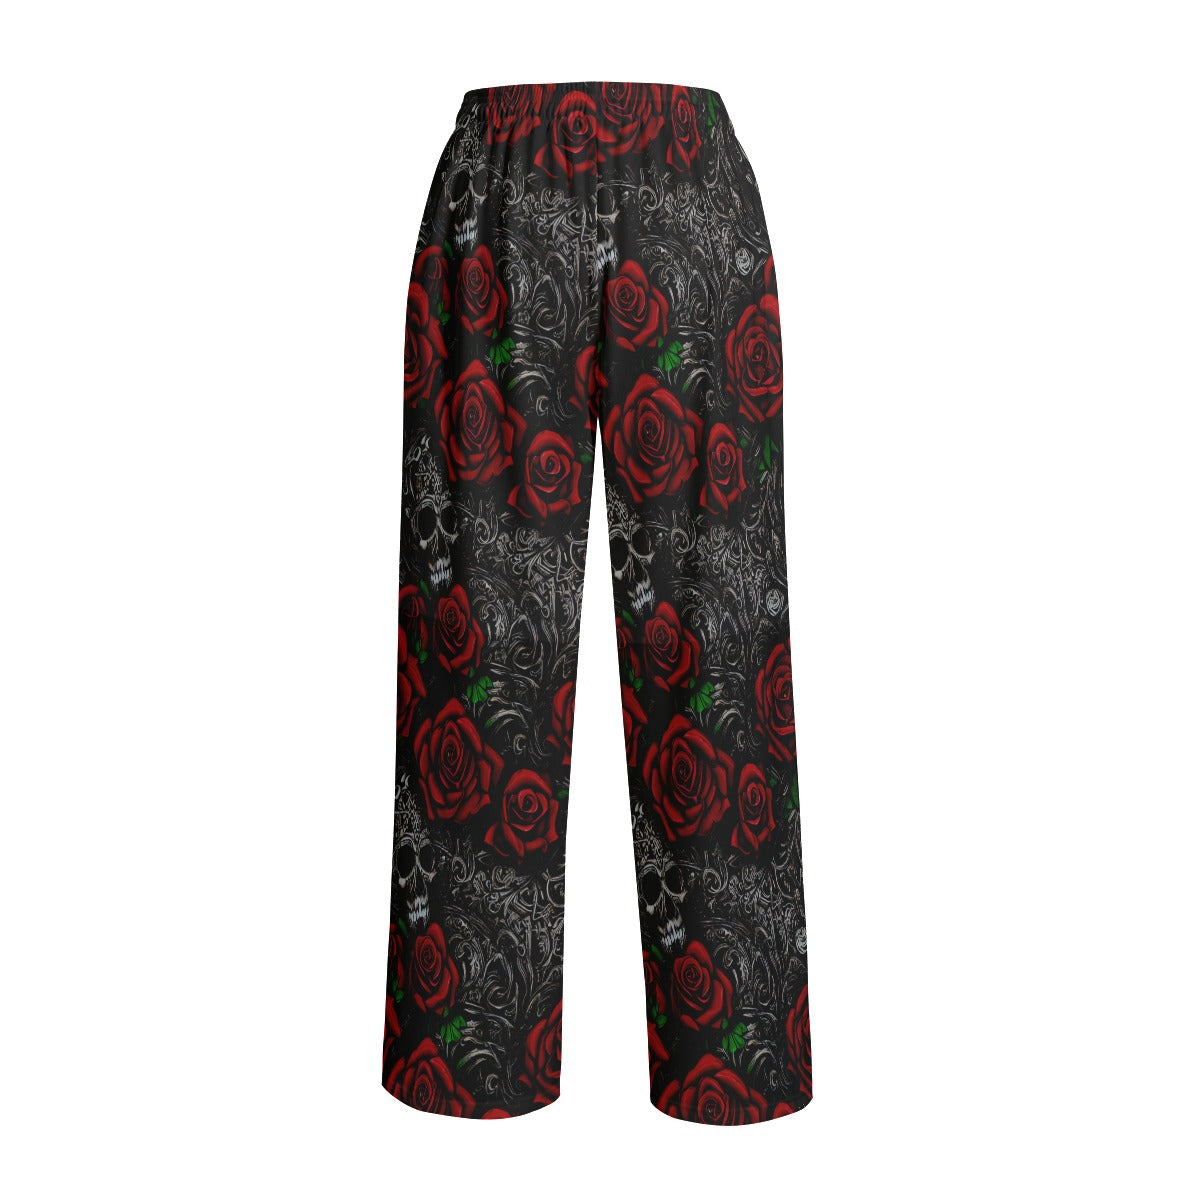 Women's Gothic Red and Black Roses and Skulls Print Lounge Wide Leg Pants